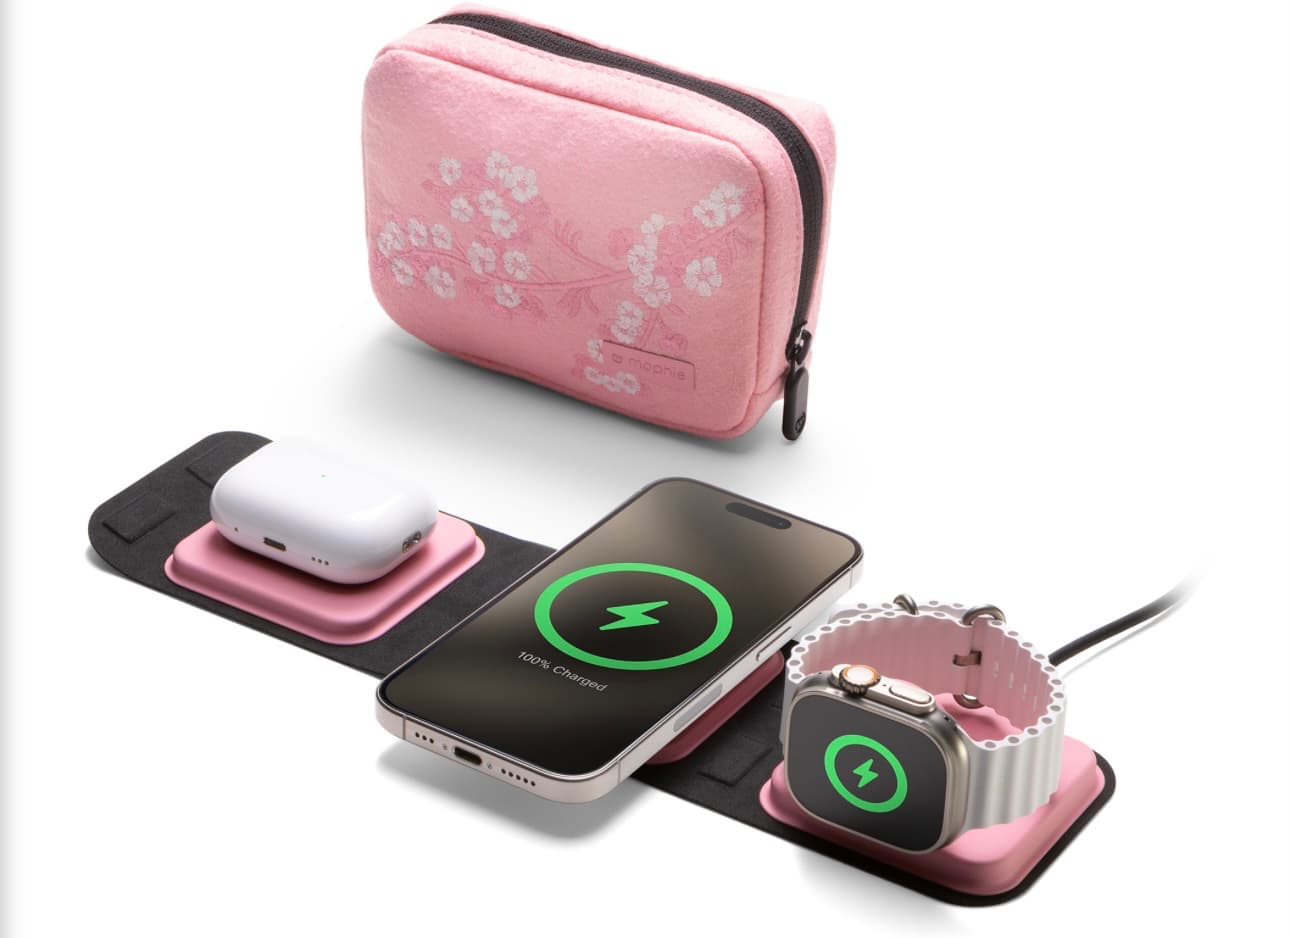 mophie announces limited edition Cherry Blossom-themed 3-in-1 travel charger with MagSafe to celebrate Spring